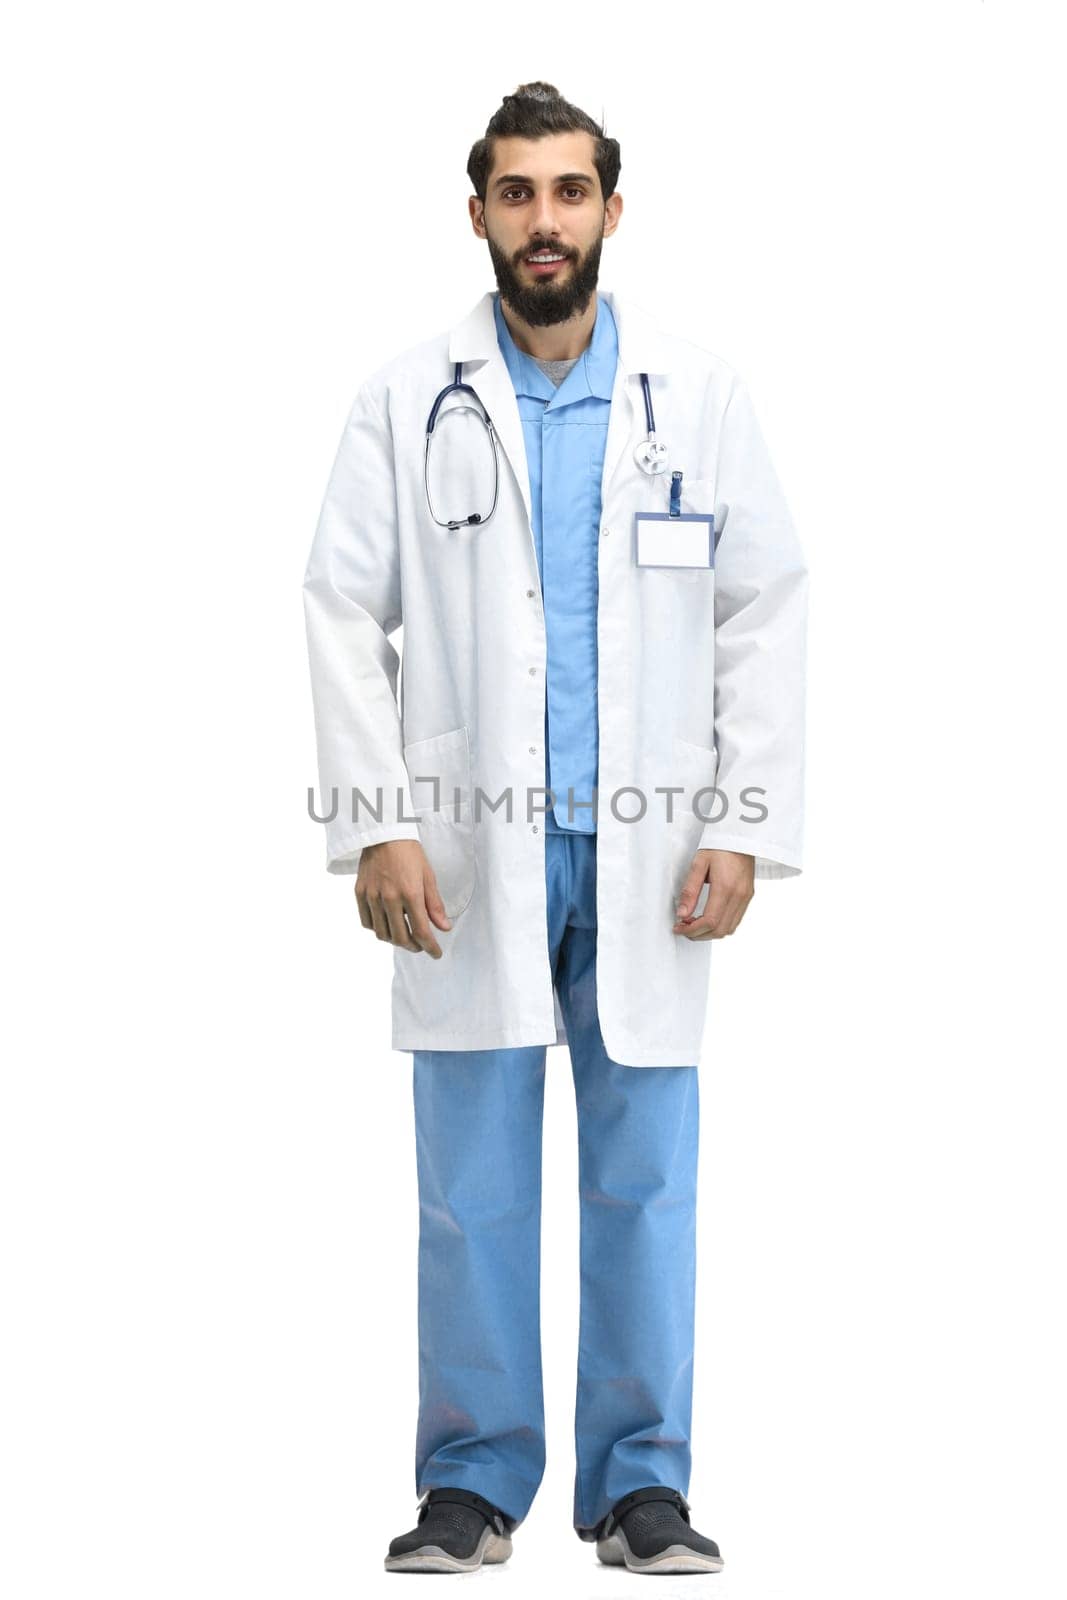 Male doctor, full-length, on a white background.